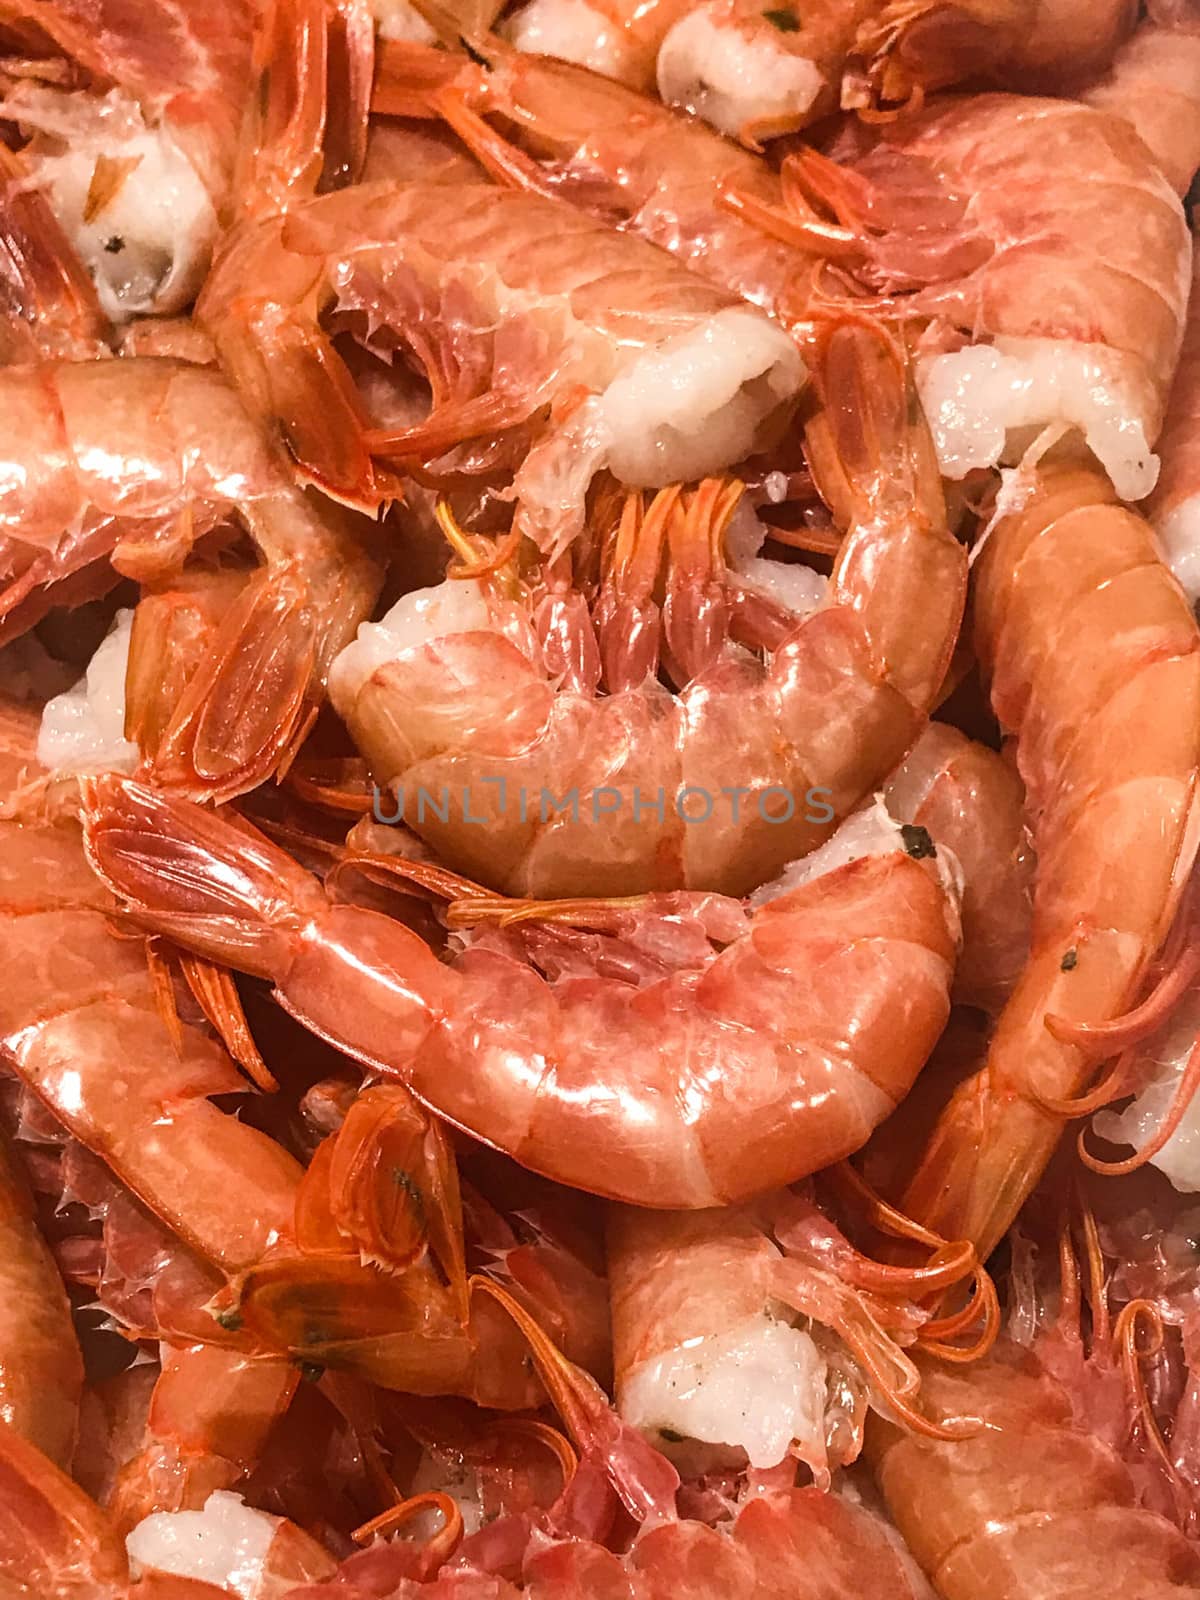 Shrimp tails ready to be bought in a fish shop